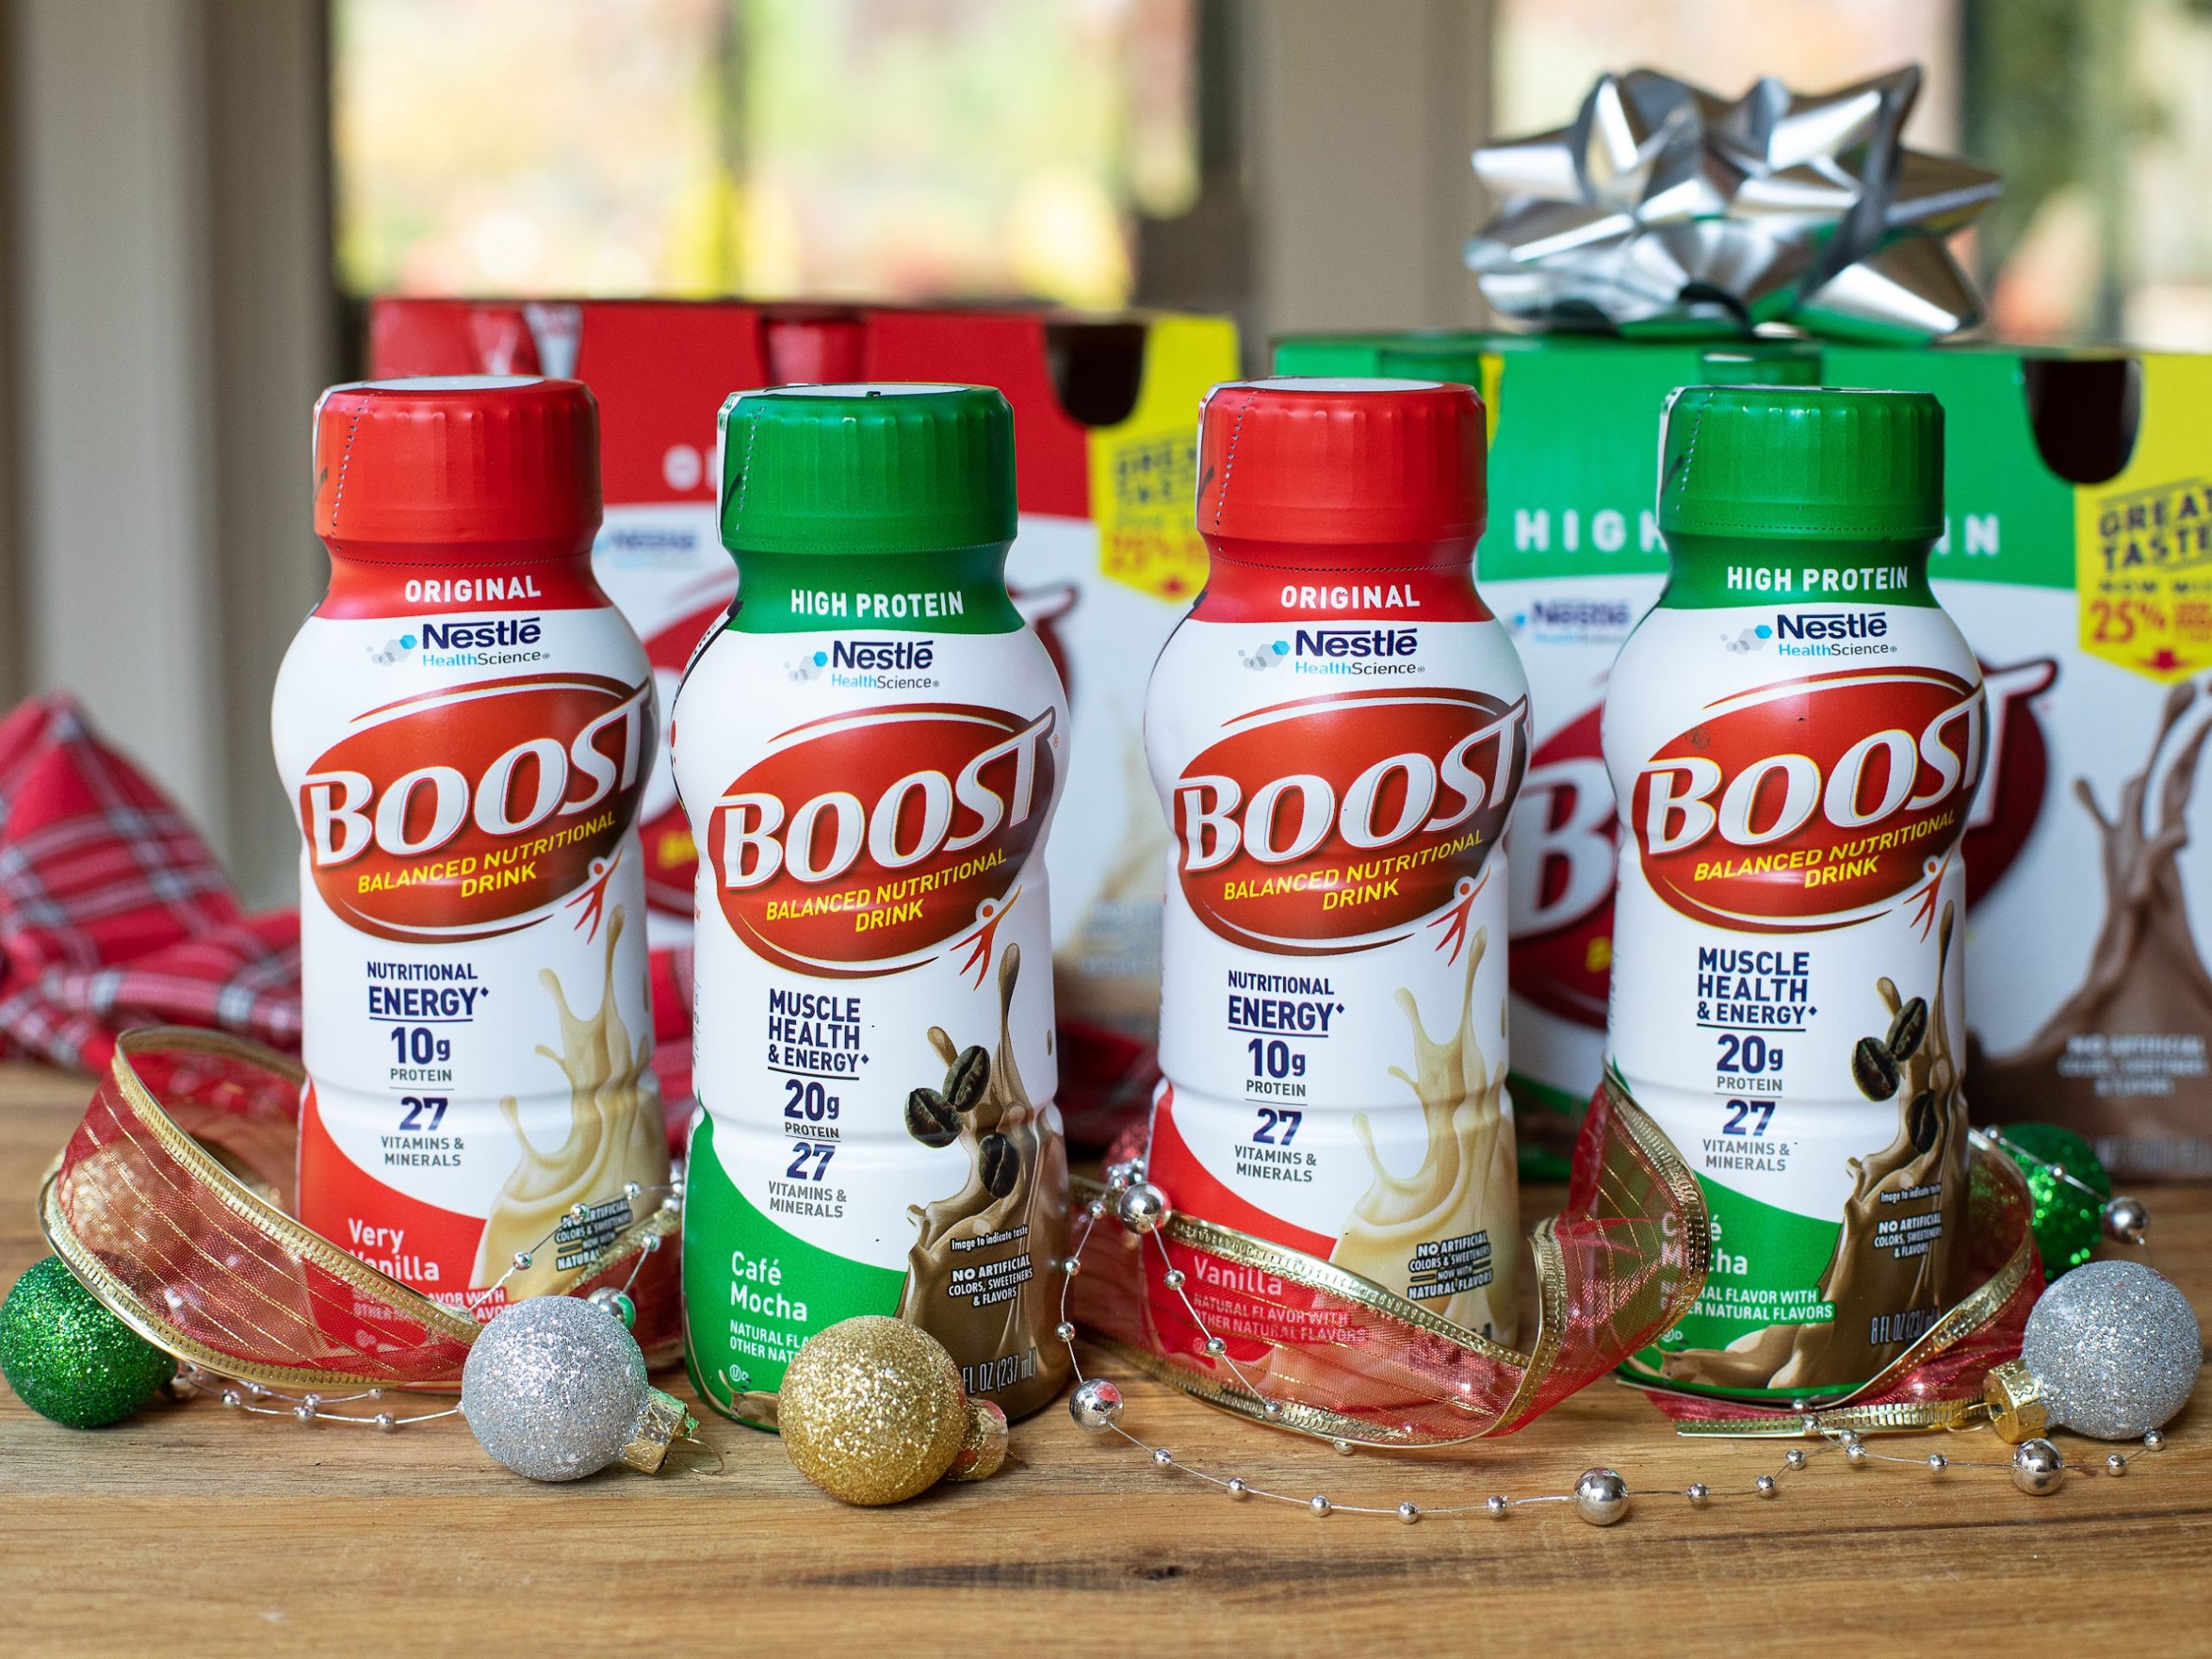 Save $4 On BOOST® Nutritional Drinks At Publix - Stock Up For The Busy Holiday Season! on I Heart Publix